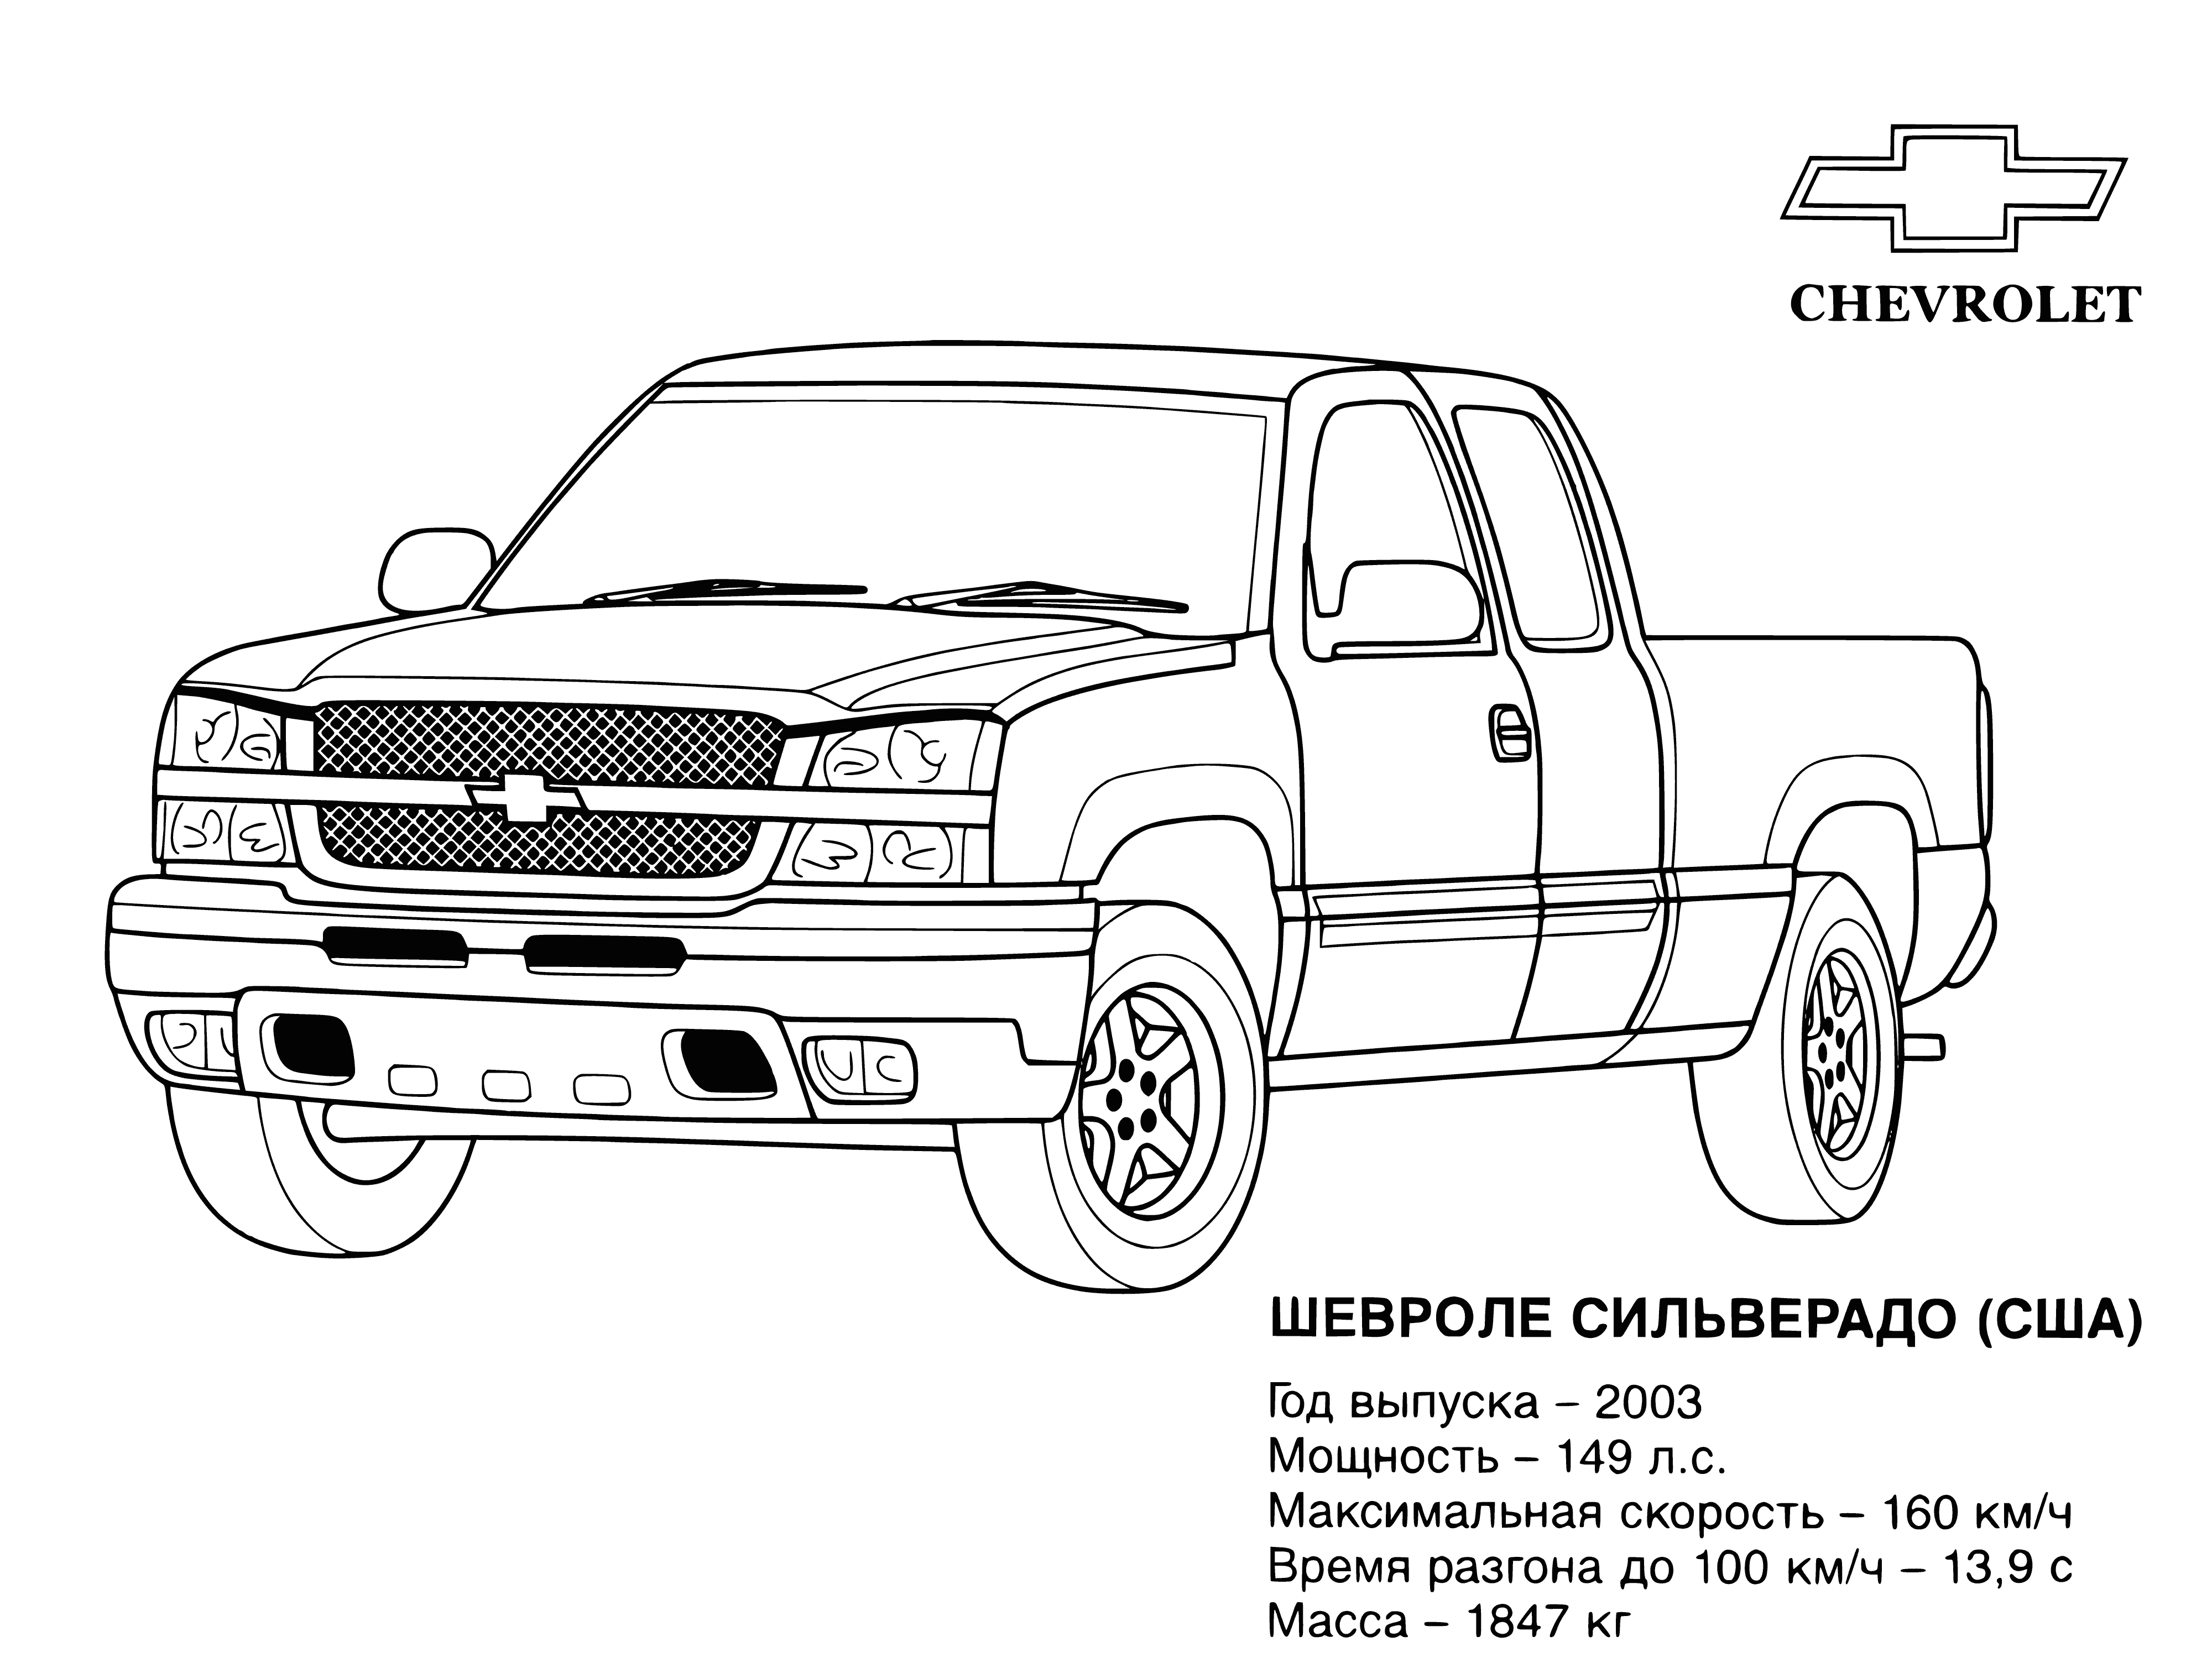 coloring page: 3 red jeeps: 2 Wranglers & 1 Chevy Trailblazer in a lot.